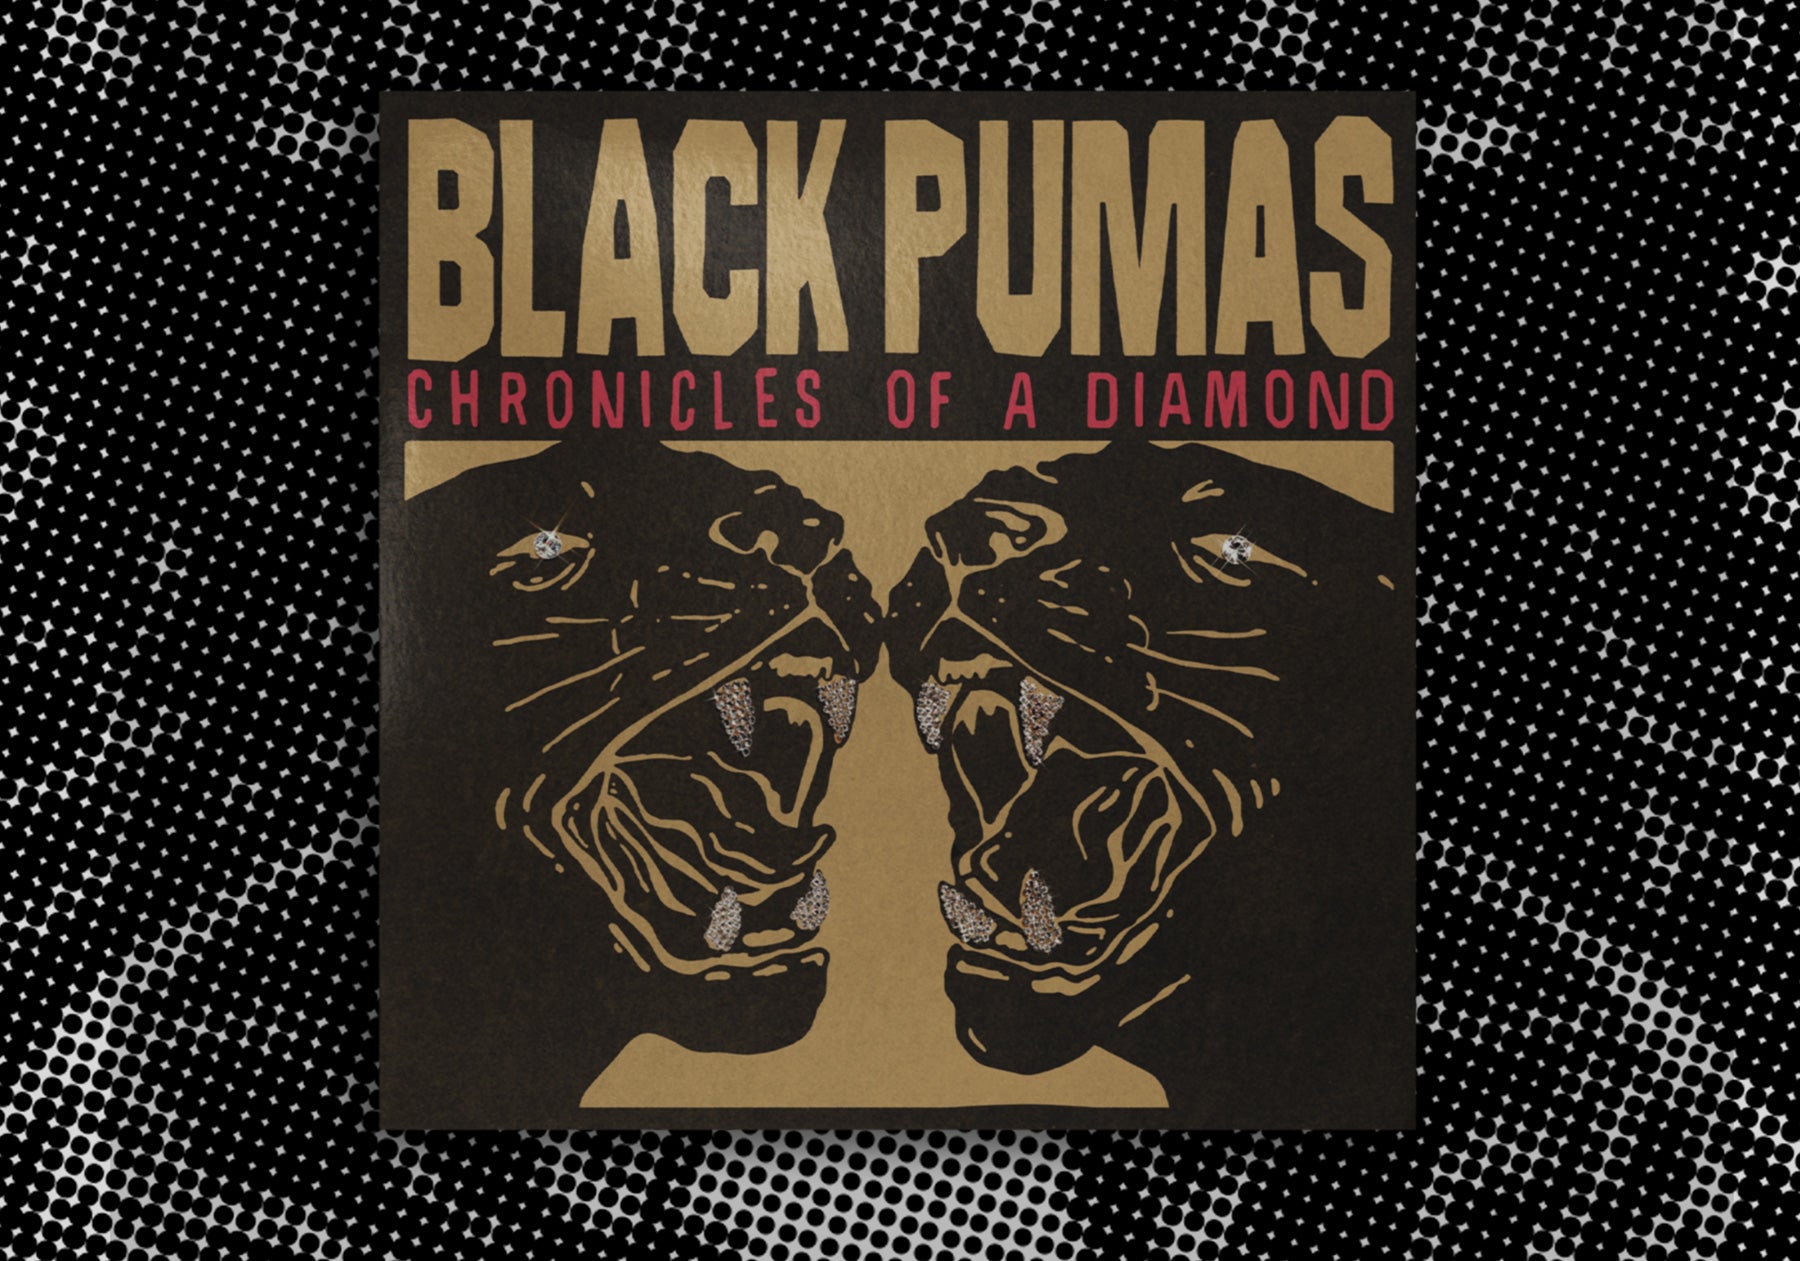 Record of the Month: Black Pumas - Chronicles of a Diamond